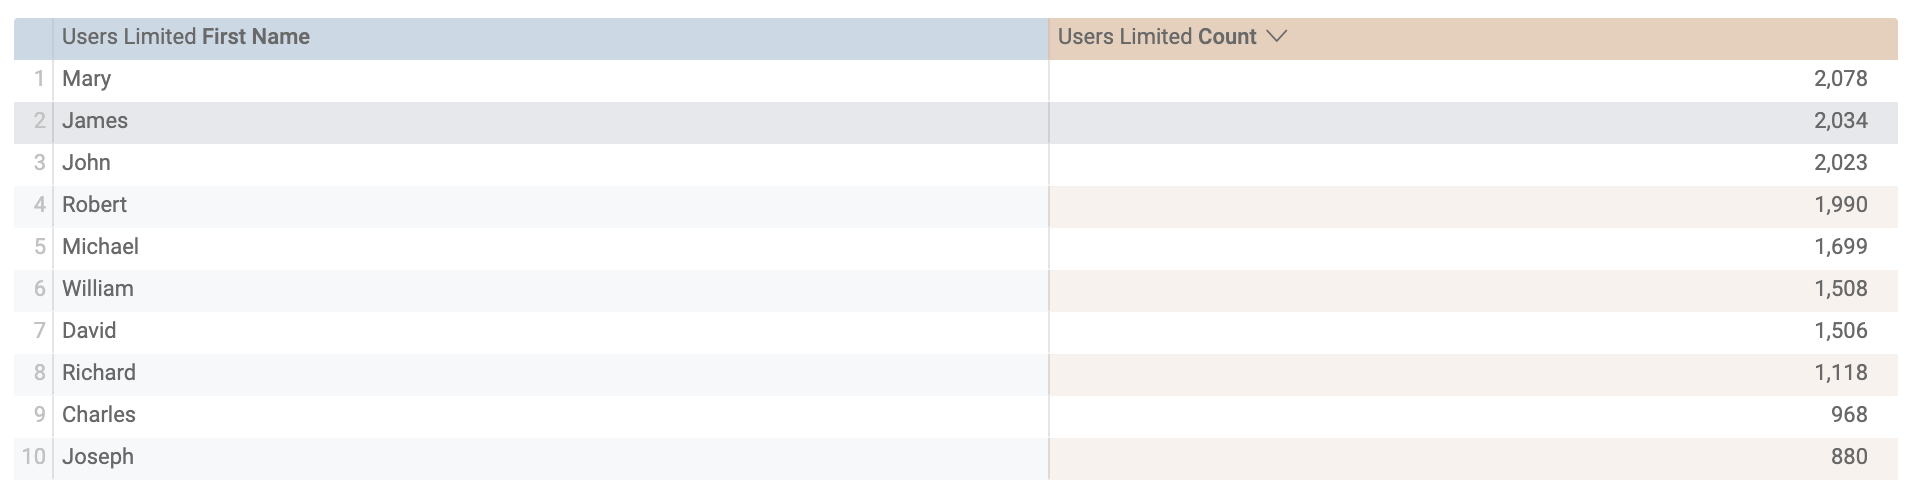 Ten rows of data in a two-column table with headings: Users limited first name and Users limited content